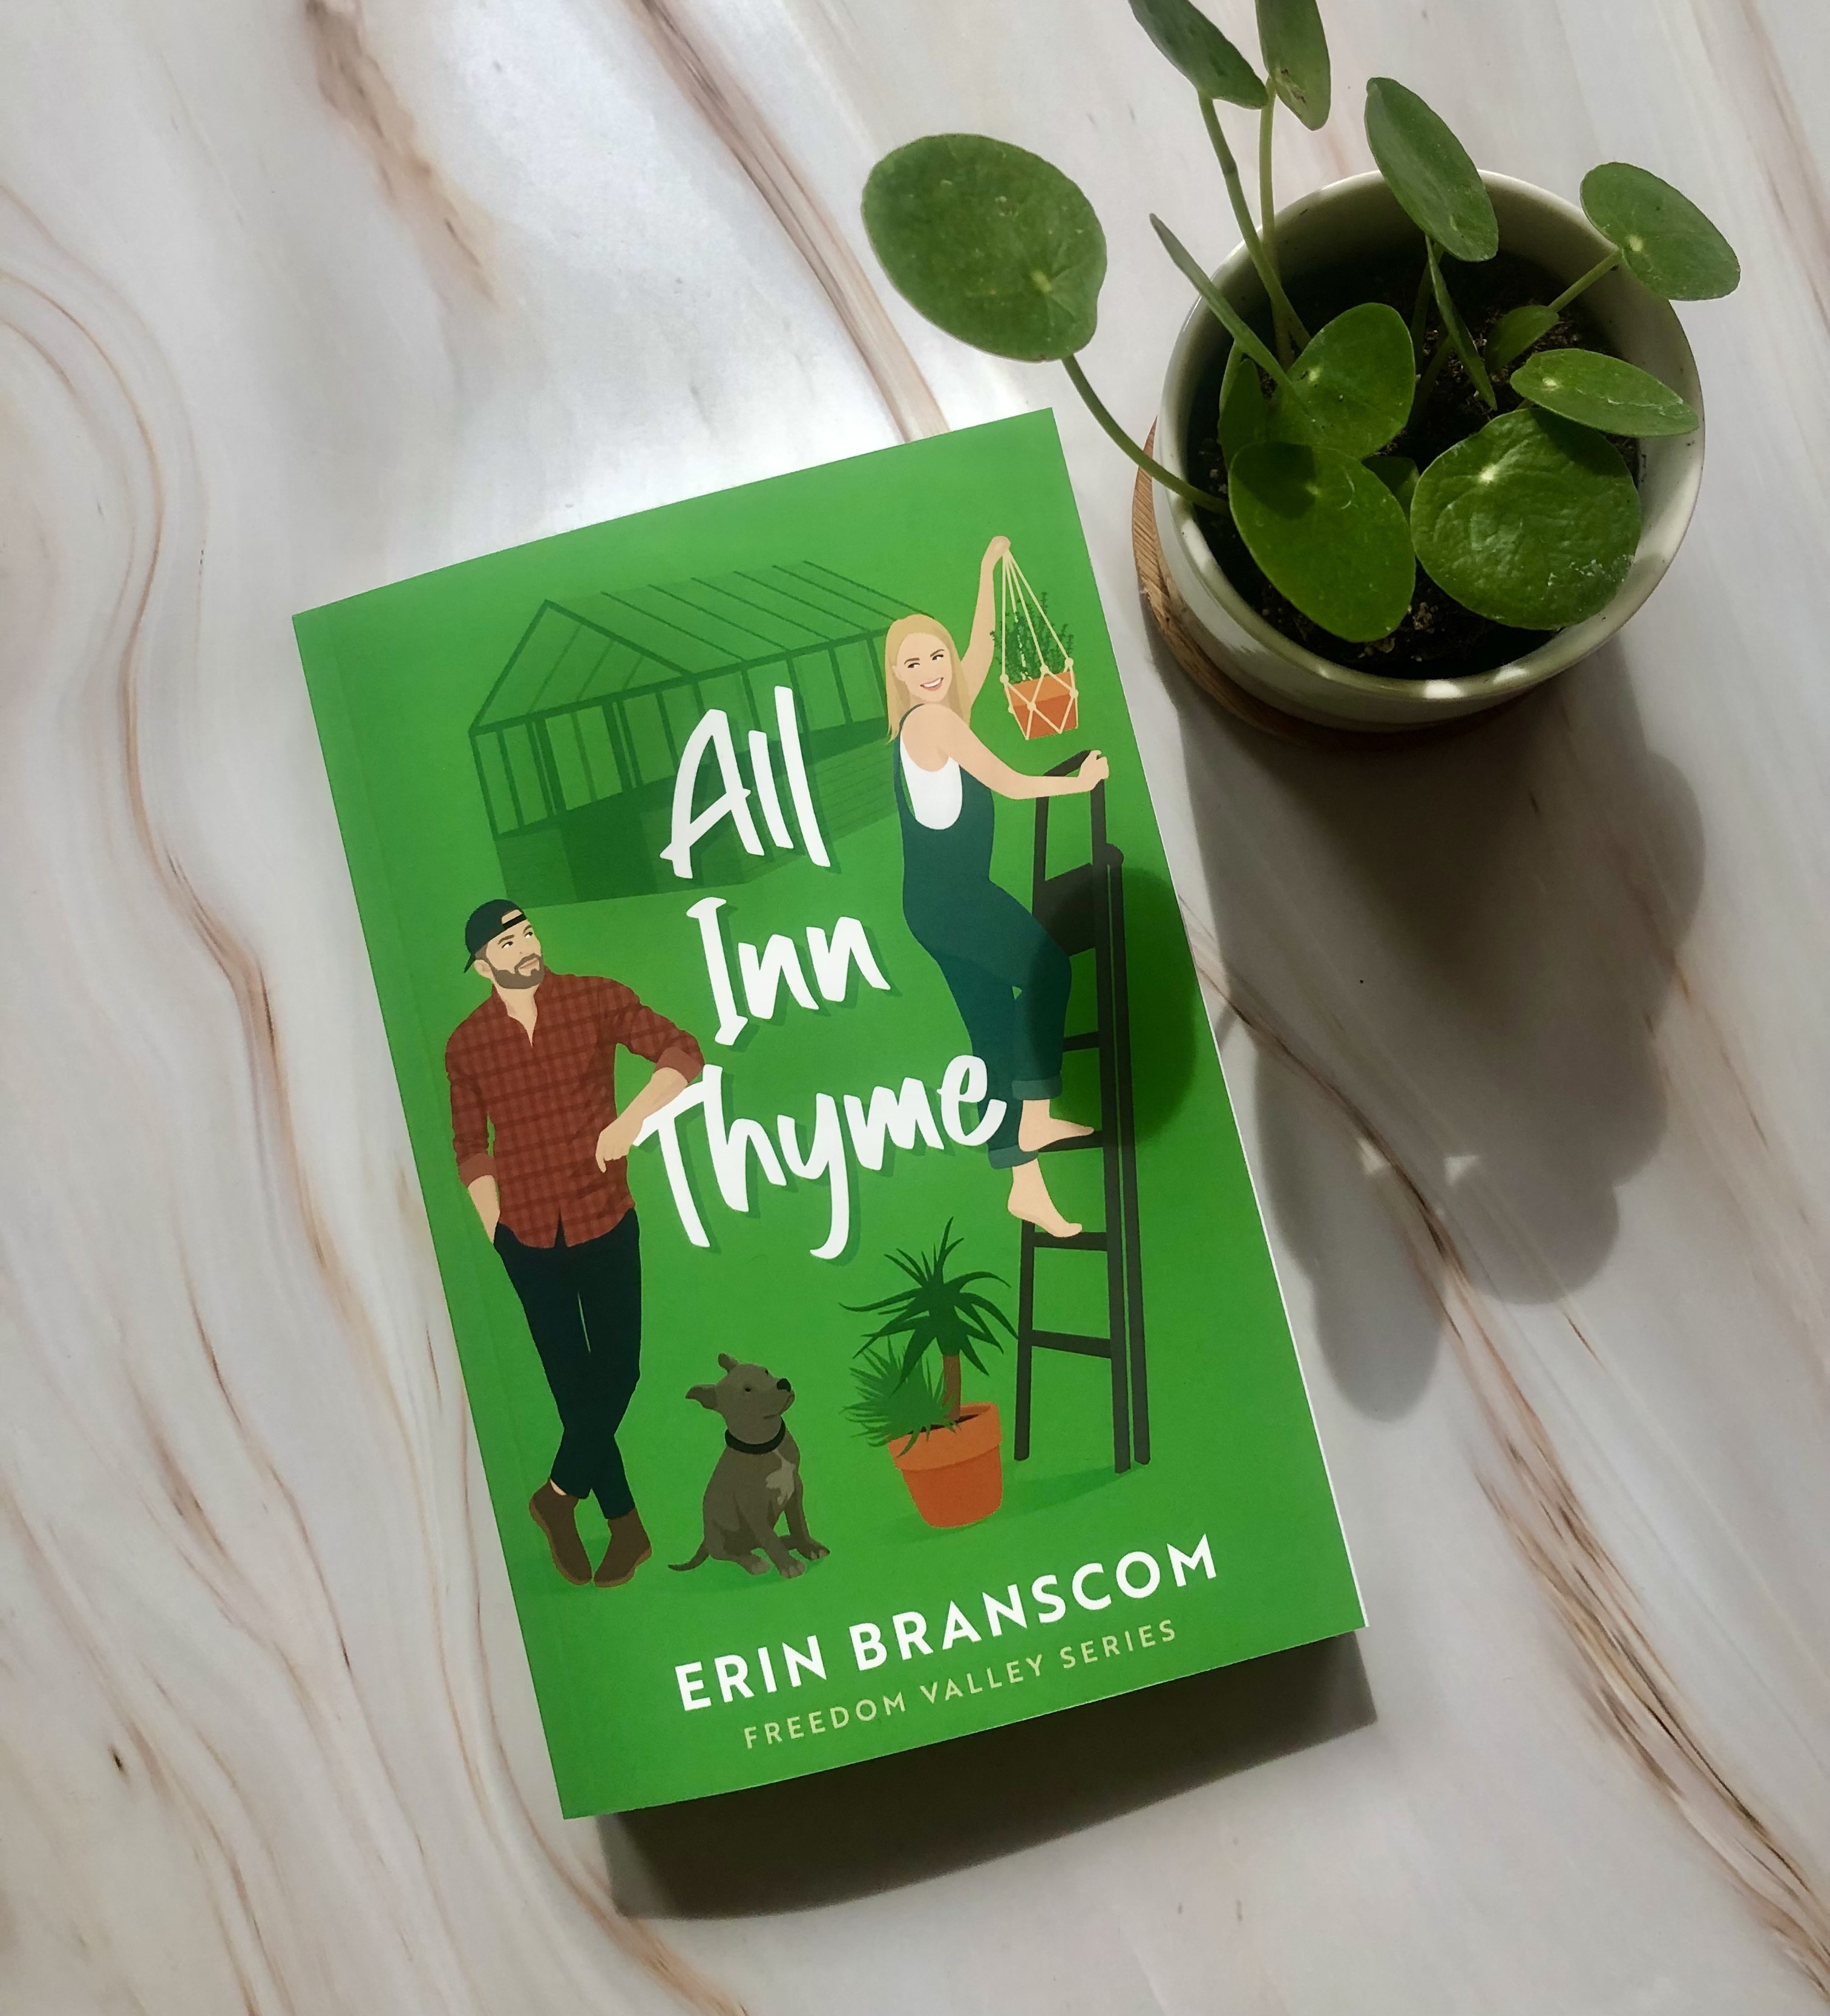 "All In Thyme" book cover